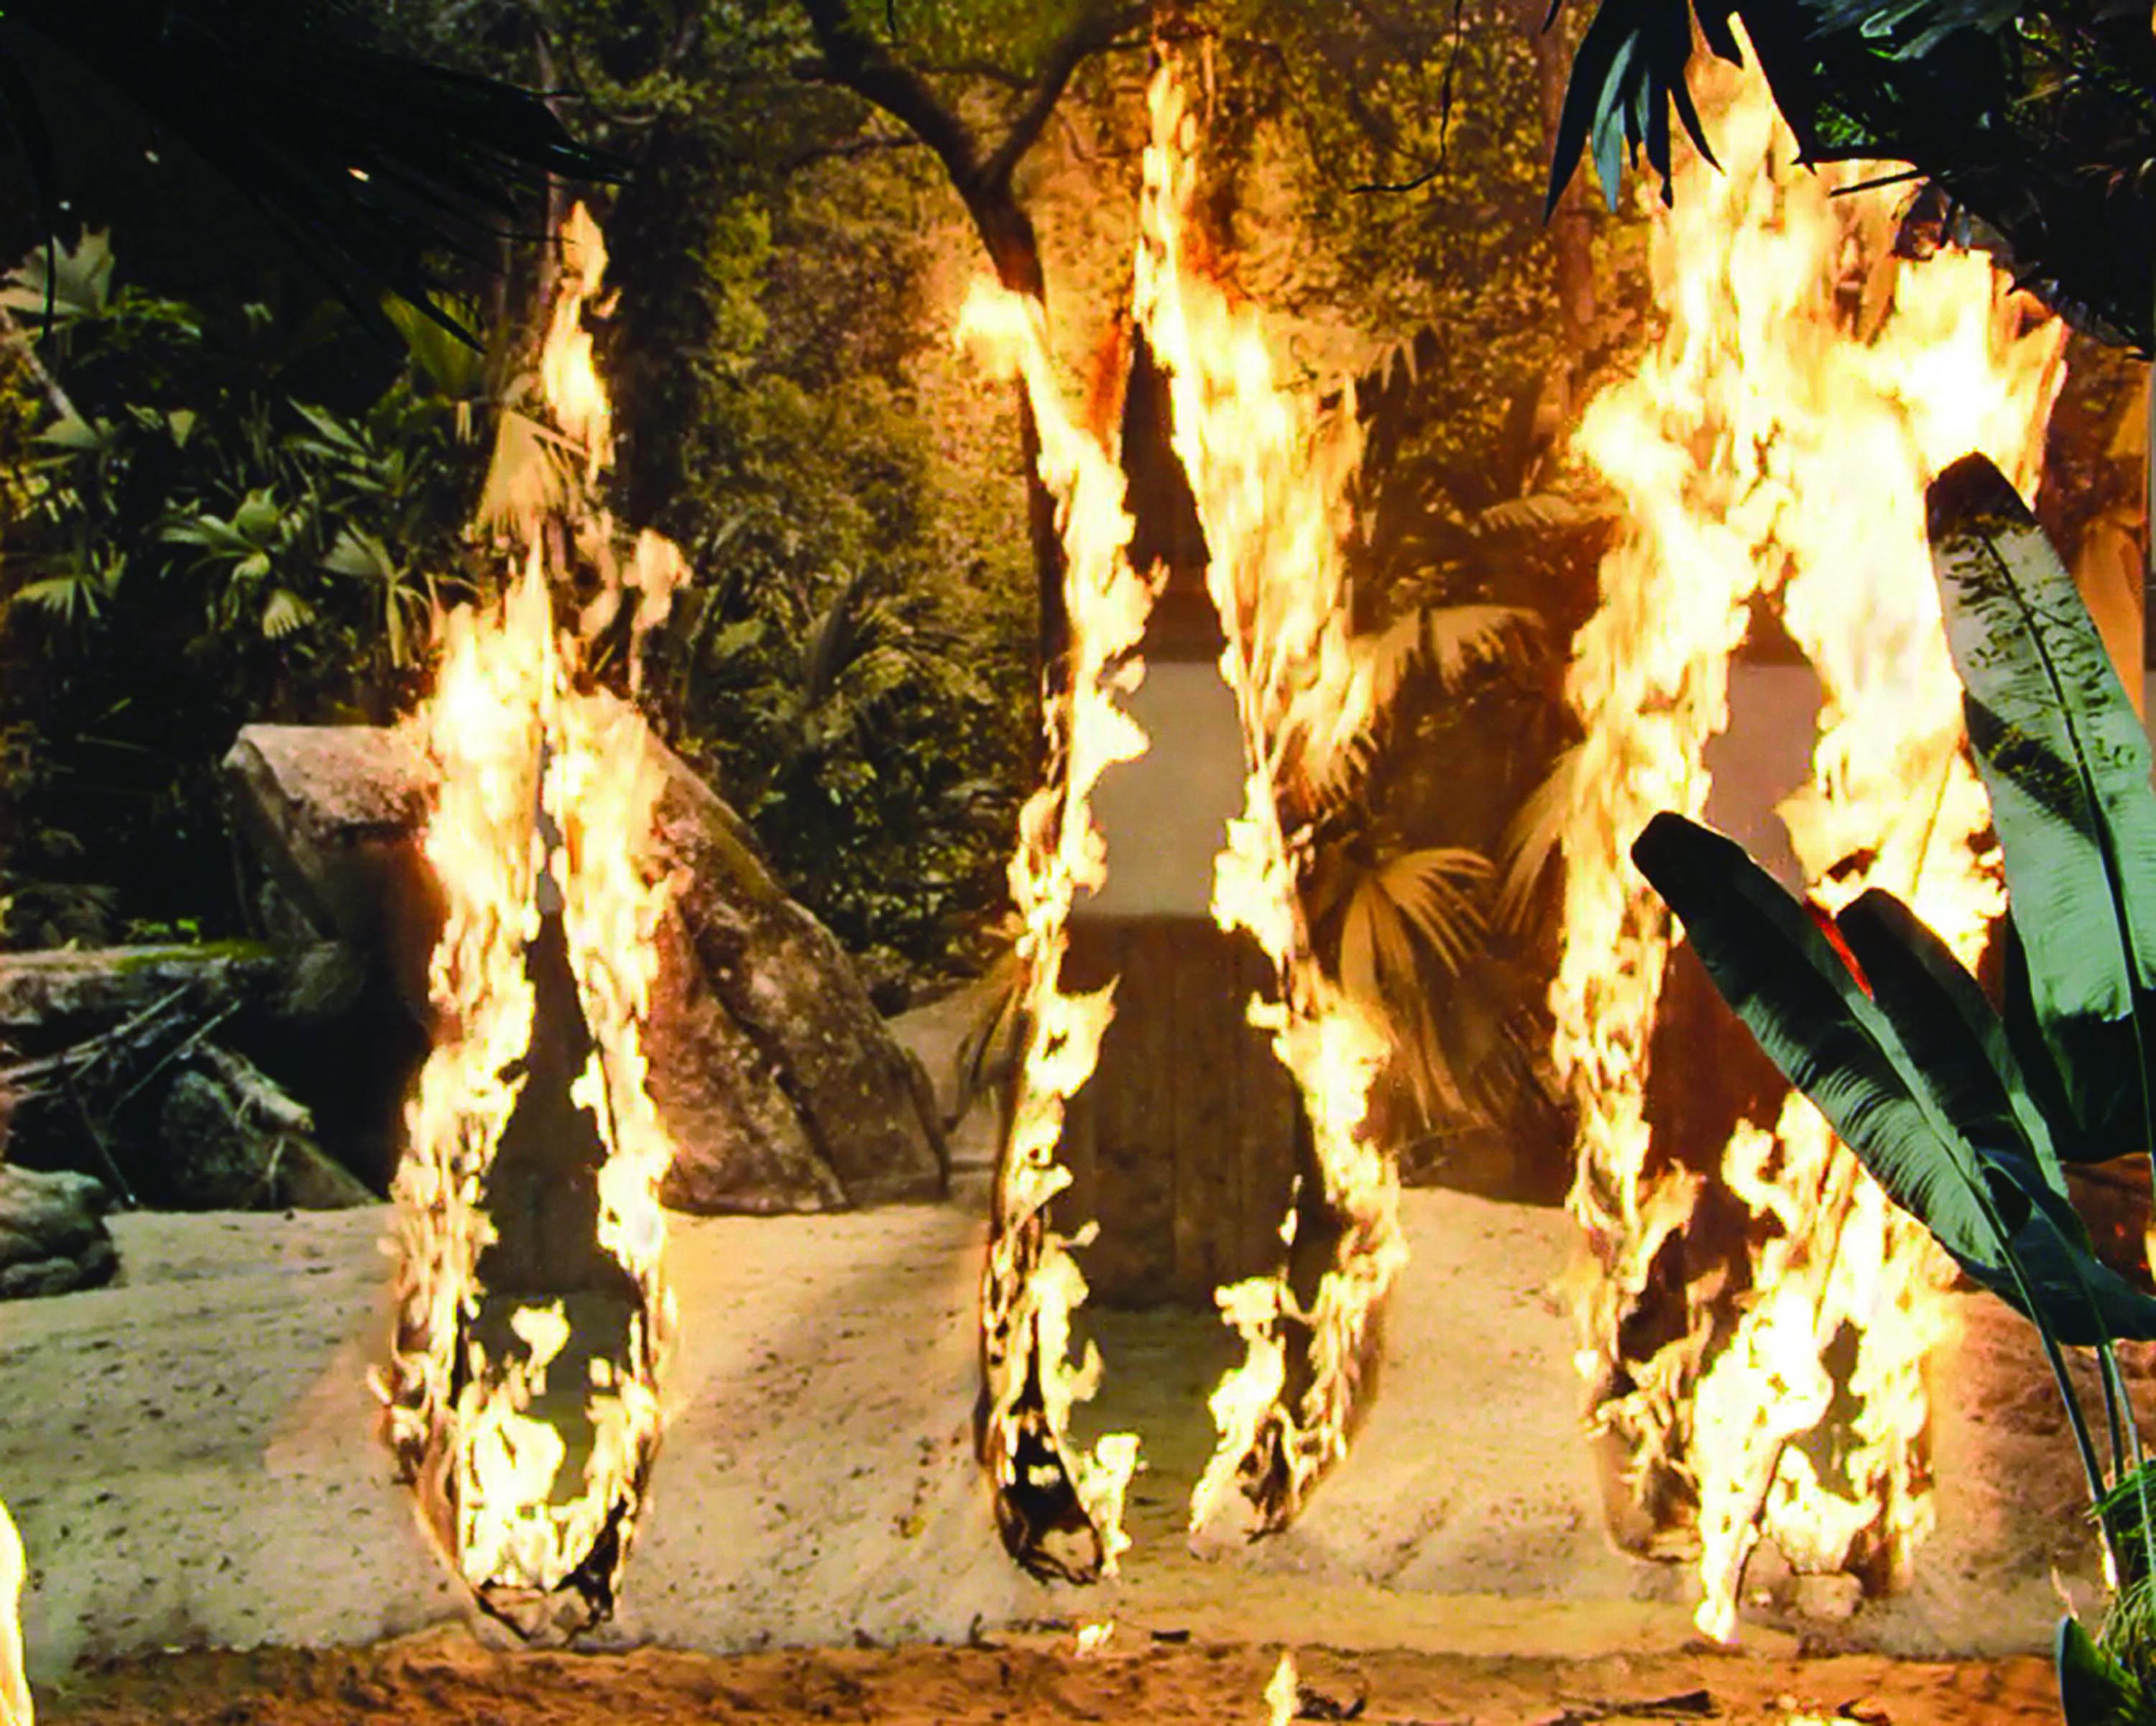 A still image from a short film showing what looks like a beach jungle on fire in three places, right in front of the viewer. In reality, the image is a hanging, large-scale photograph of a beach jungle engulfed with flames. Sand and plants can be seen in front of the photograph, further adding to the illusion. As the photograph burns, it reveals the fabricated armature that holds up the photograph.